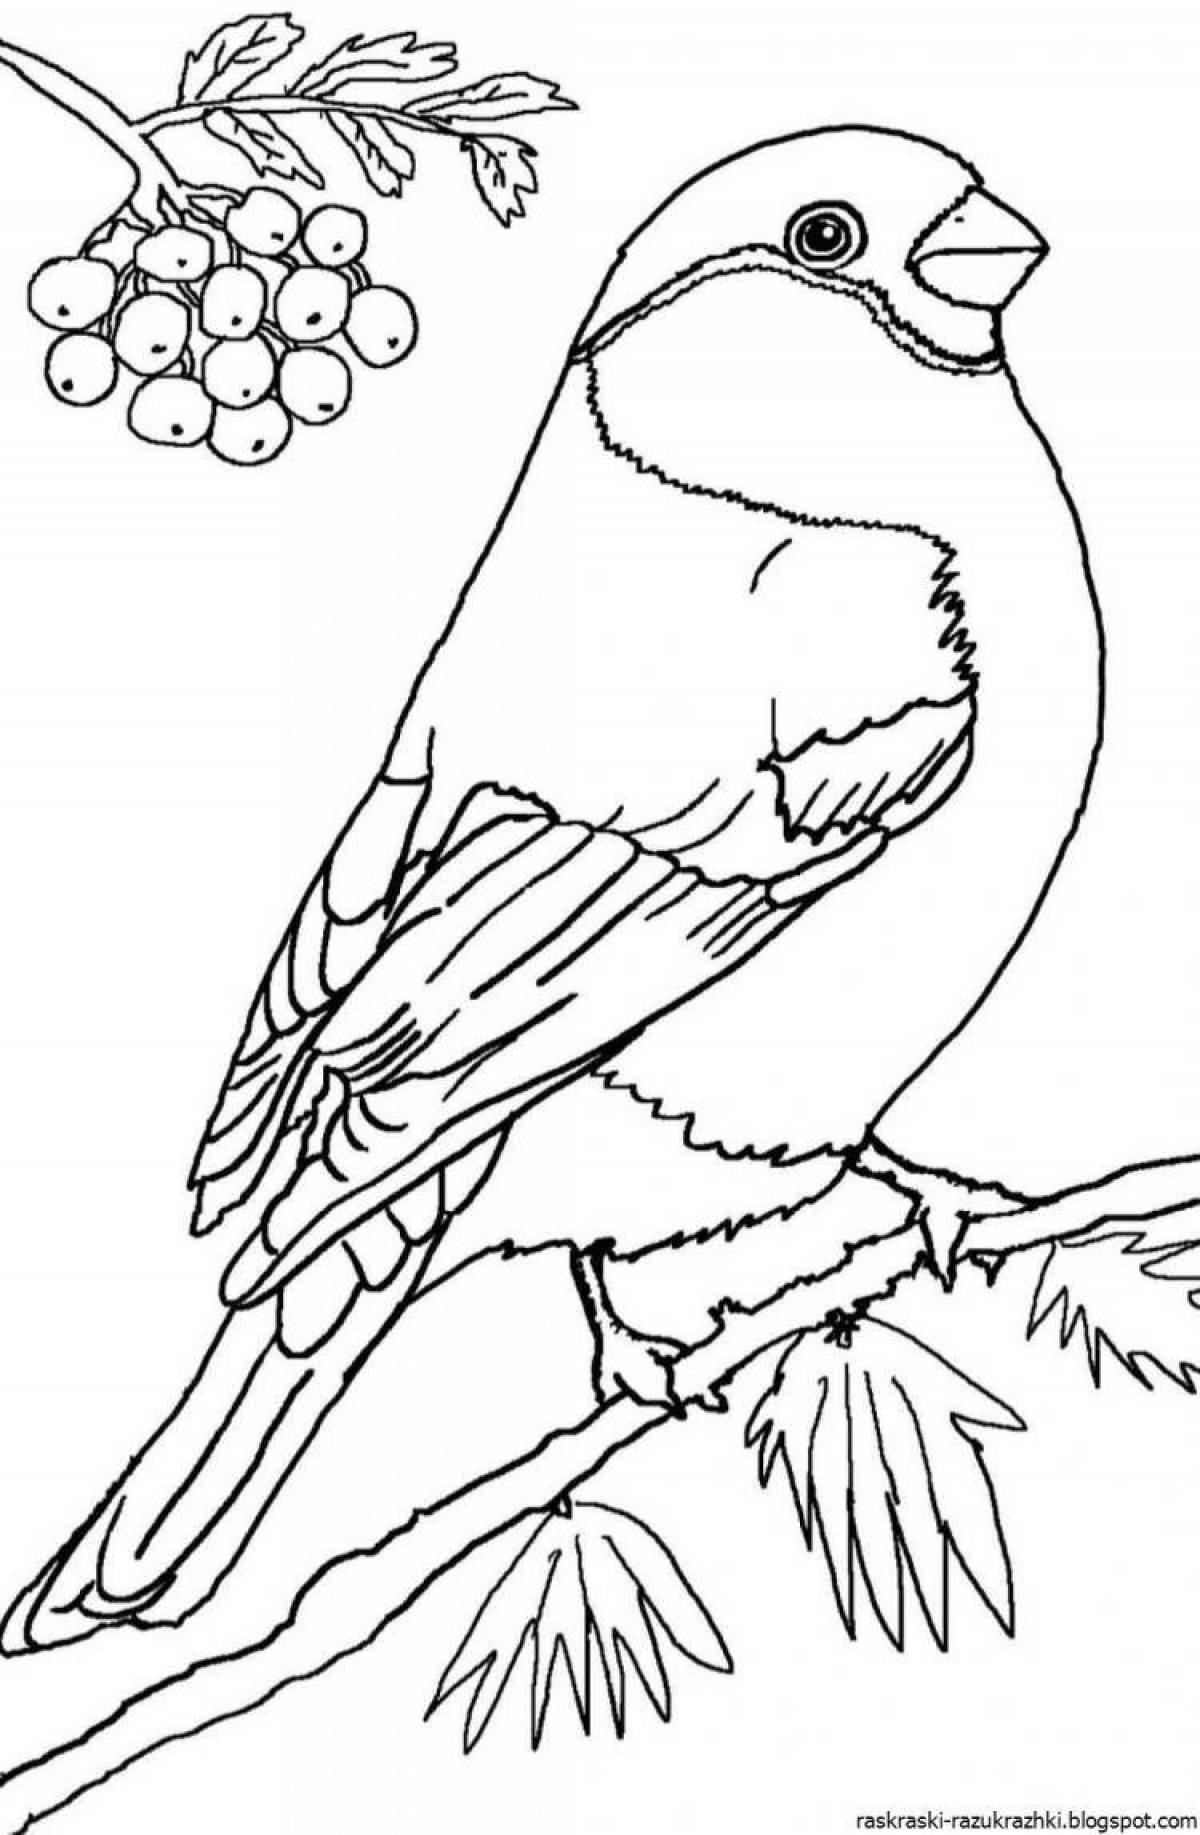 Gorgeous wintering birds coloring book for 2-3 year olds